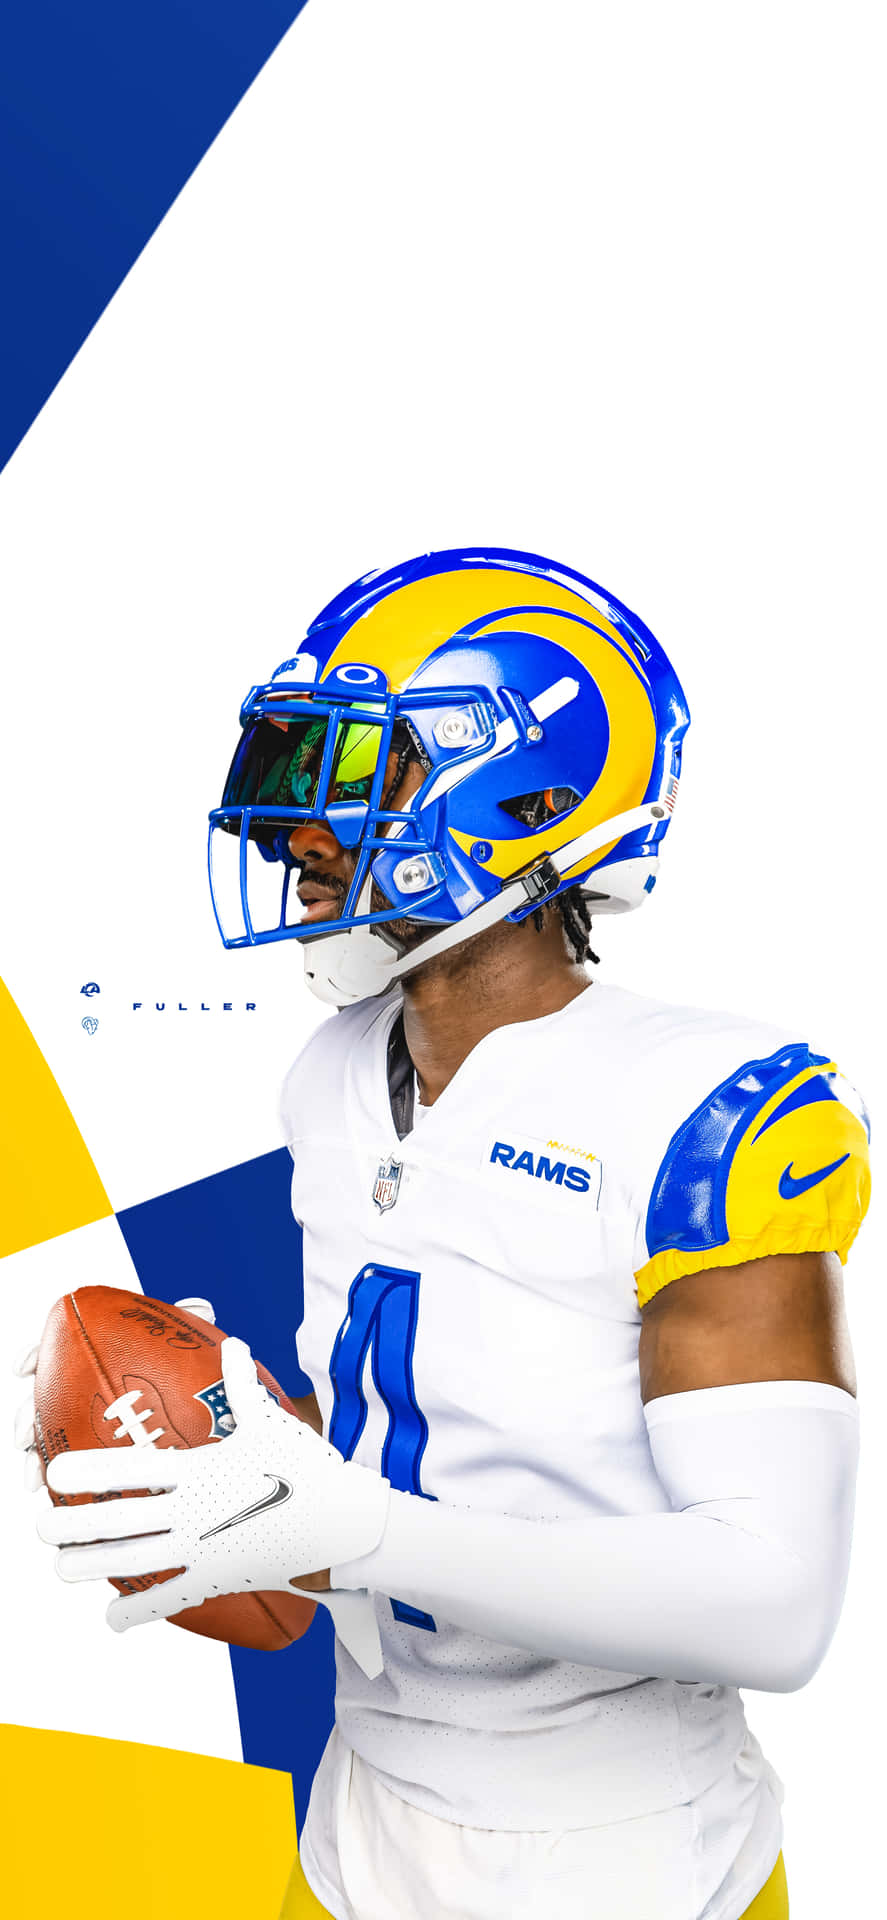 Get the Latest iPhone X Style with RAMS Wallpaper